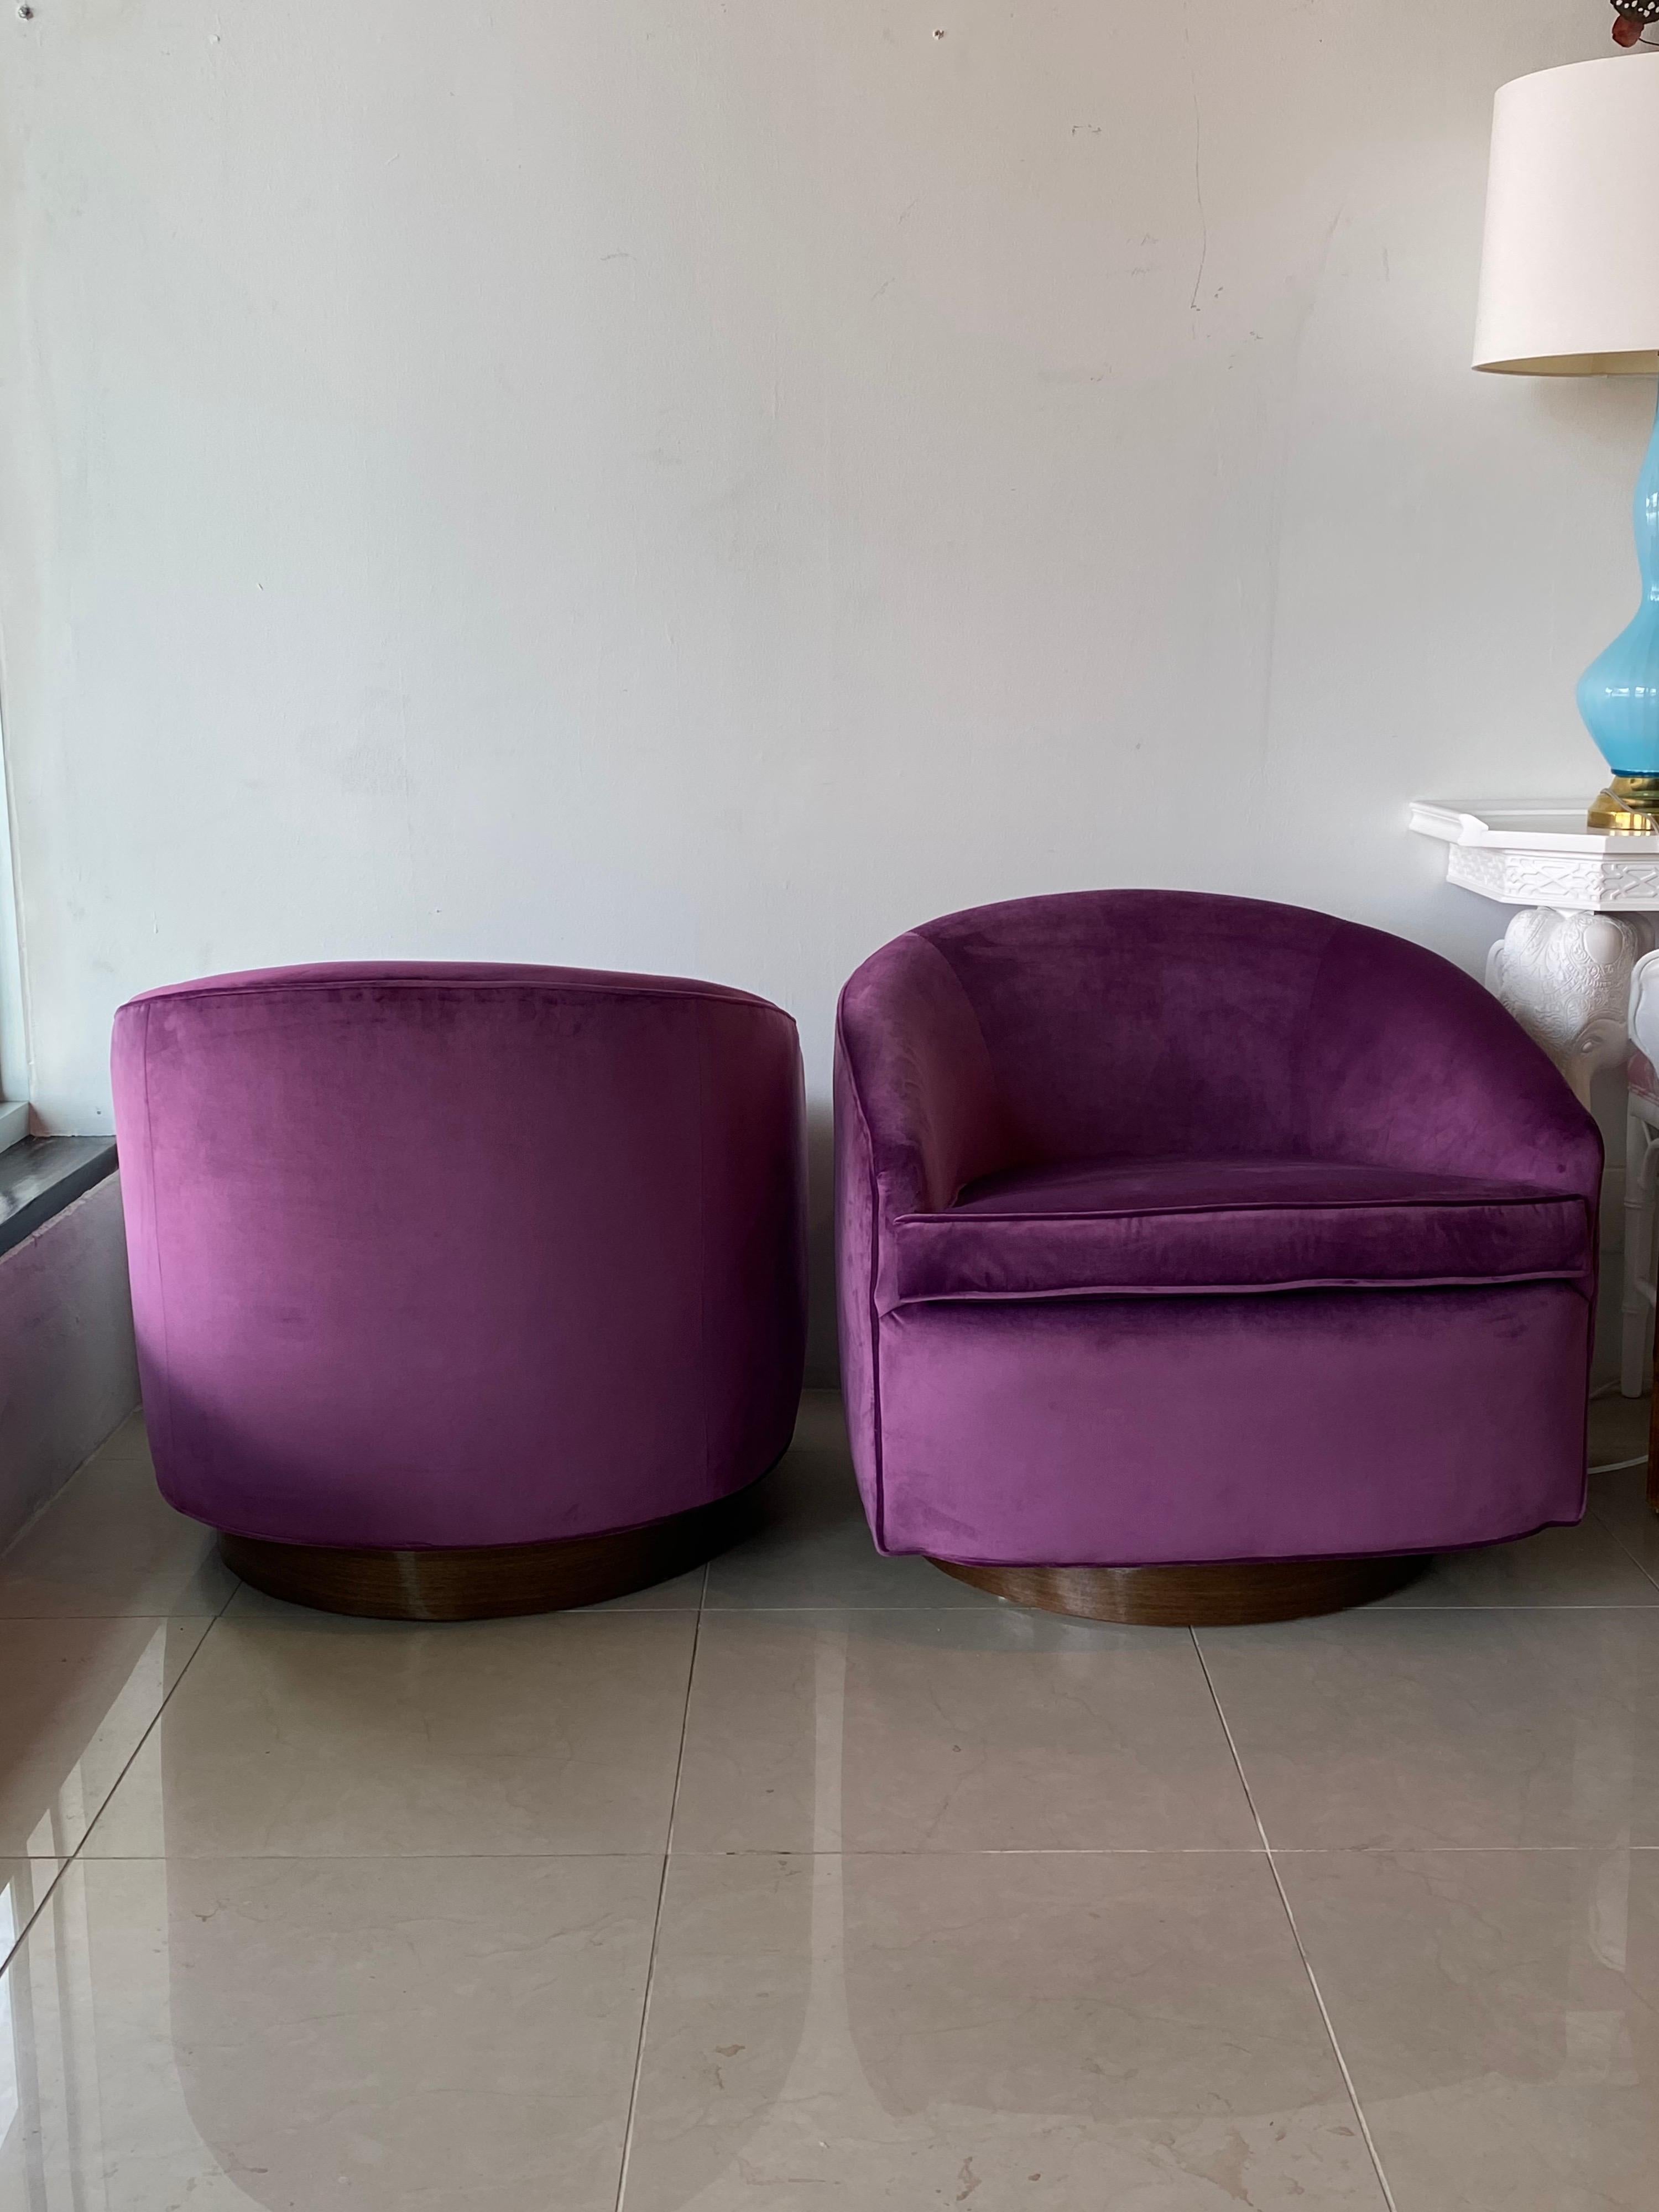 Vintage Milo Baughman Style Swivel Chairs Walnut Bases in Eggplant Velvet In Excellent Condition In West Palm Beach, FL